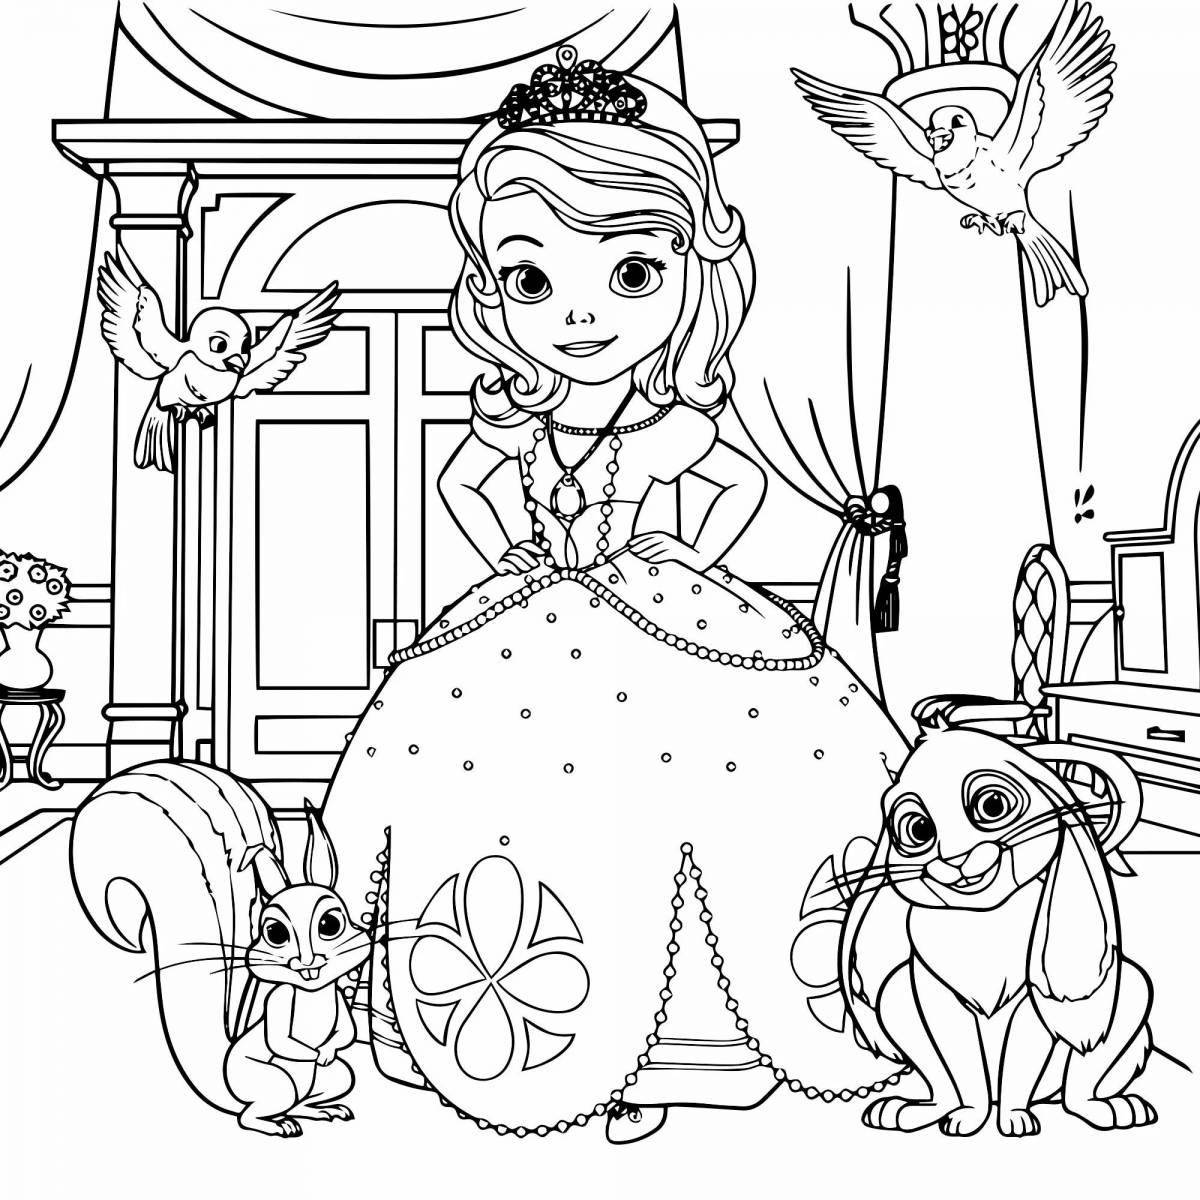 Dreamy coloring book for girls princesses 5-6 years old